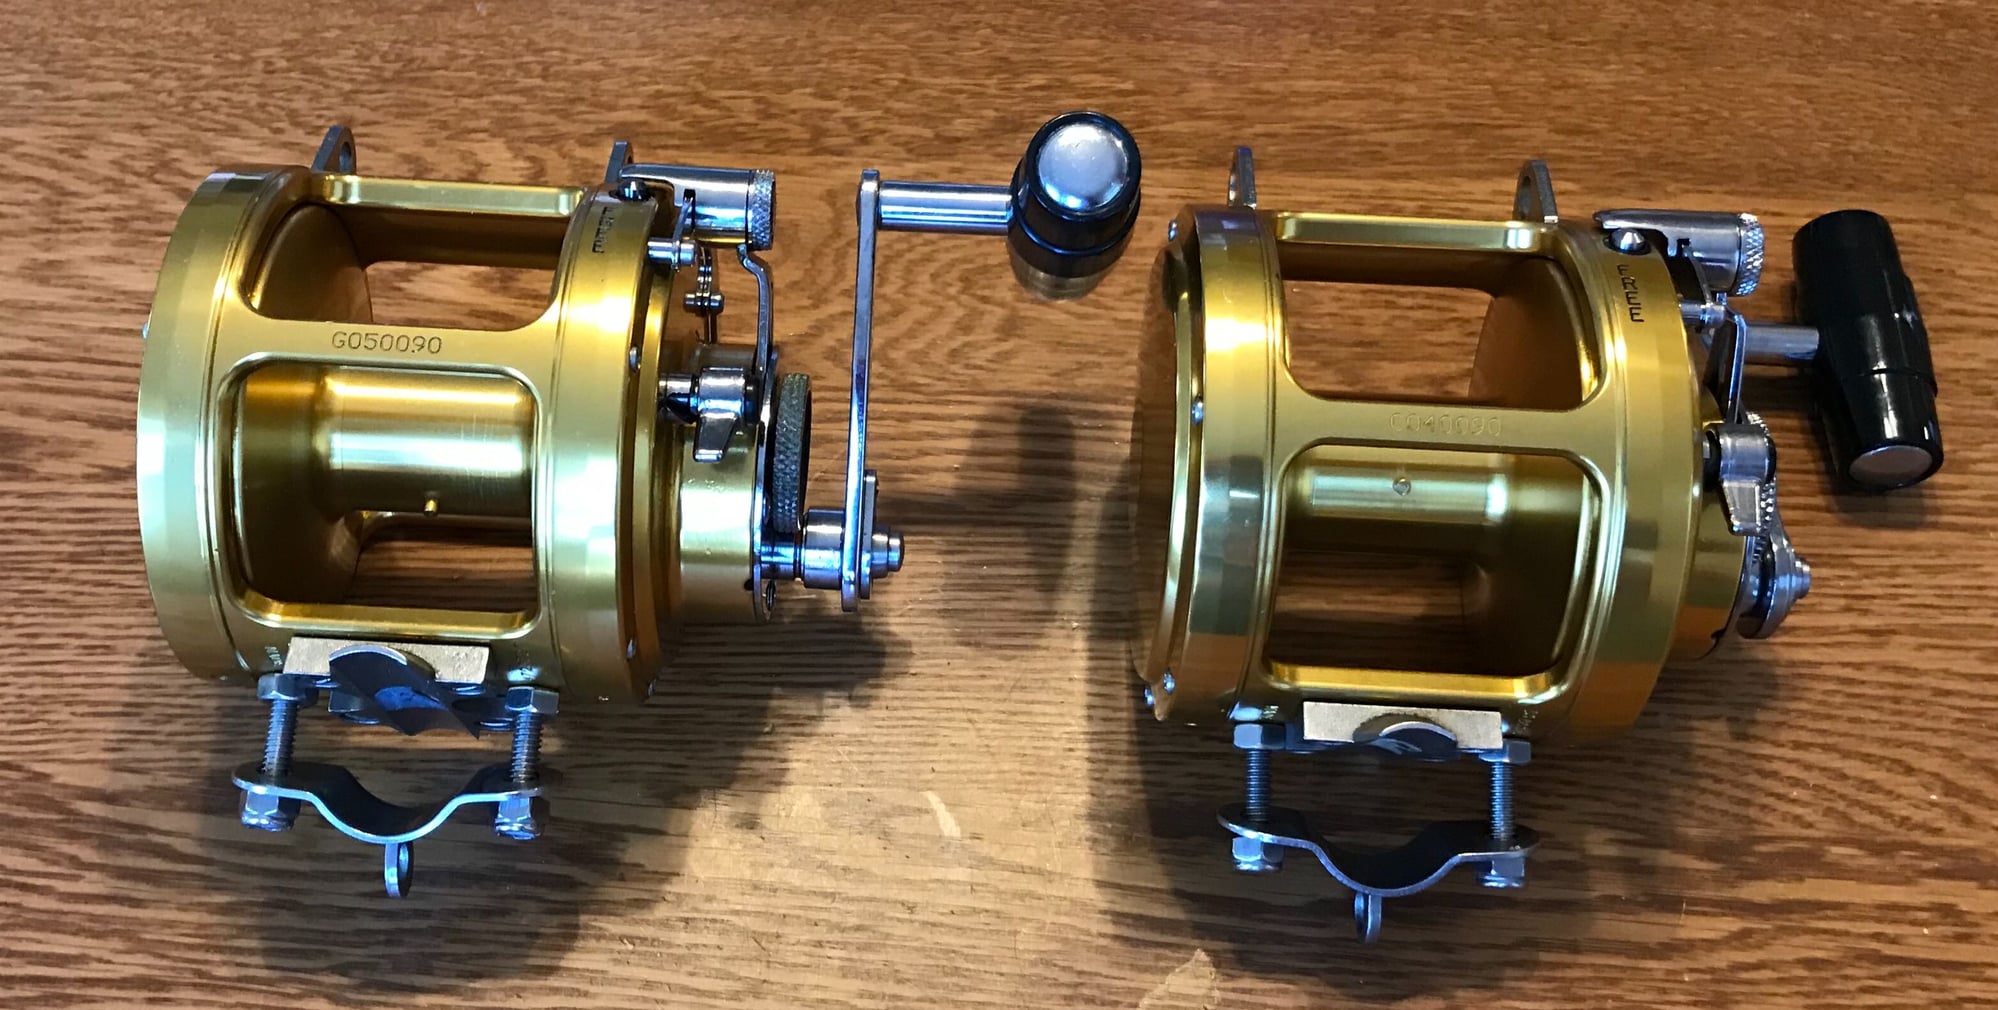 Pair of Penn International 50S reels for sale - The Hull Truth